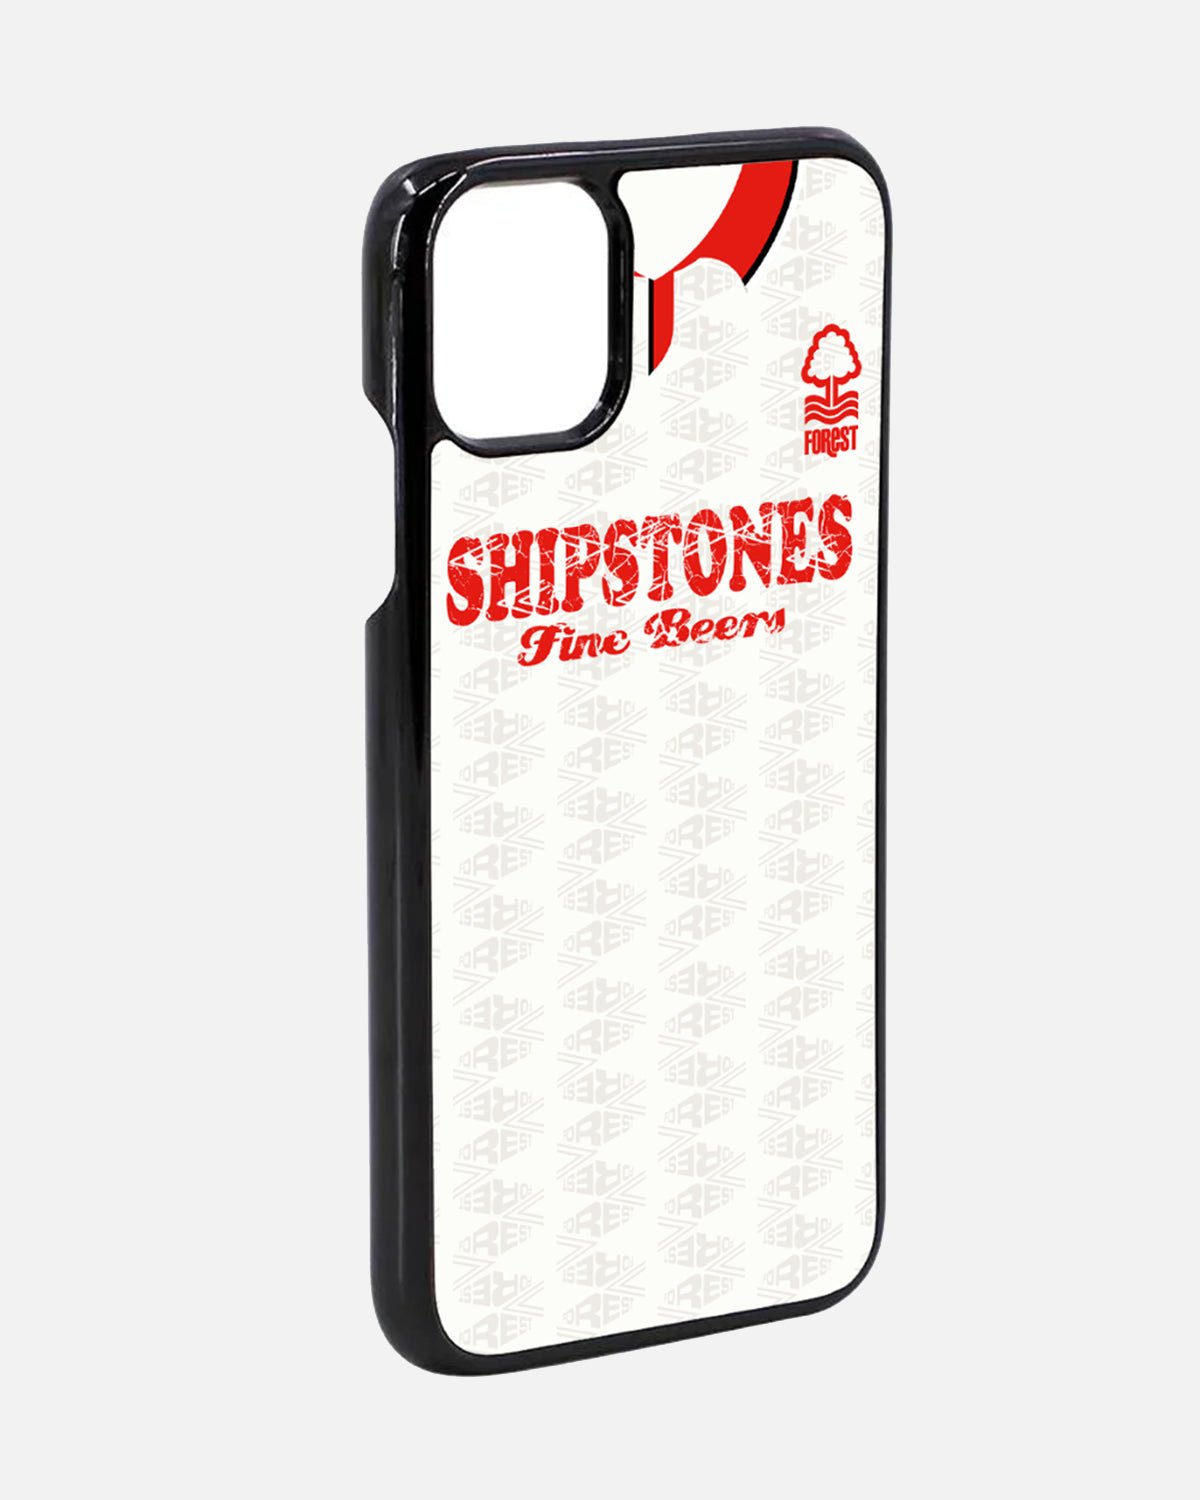 NFFC 1992 Away Kit Phone Cover - Nottingham Forest FC